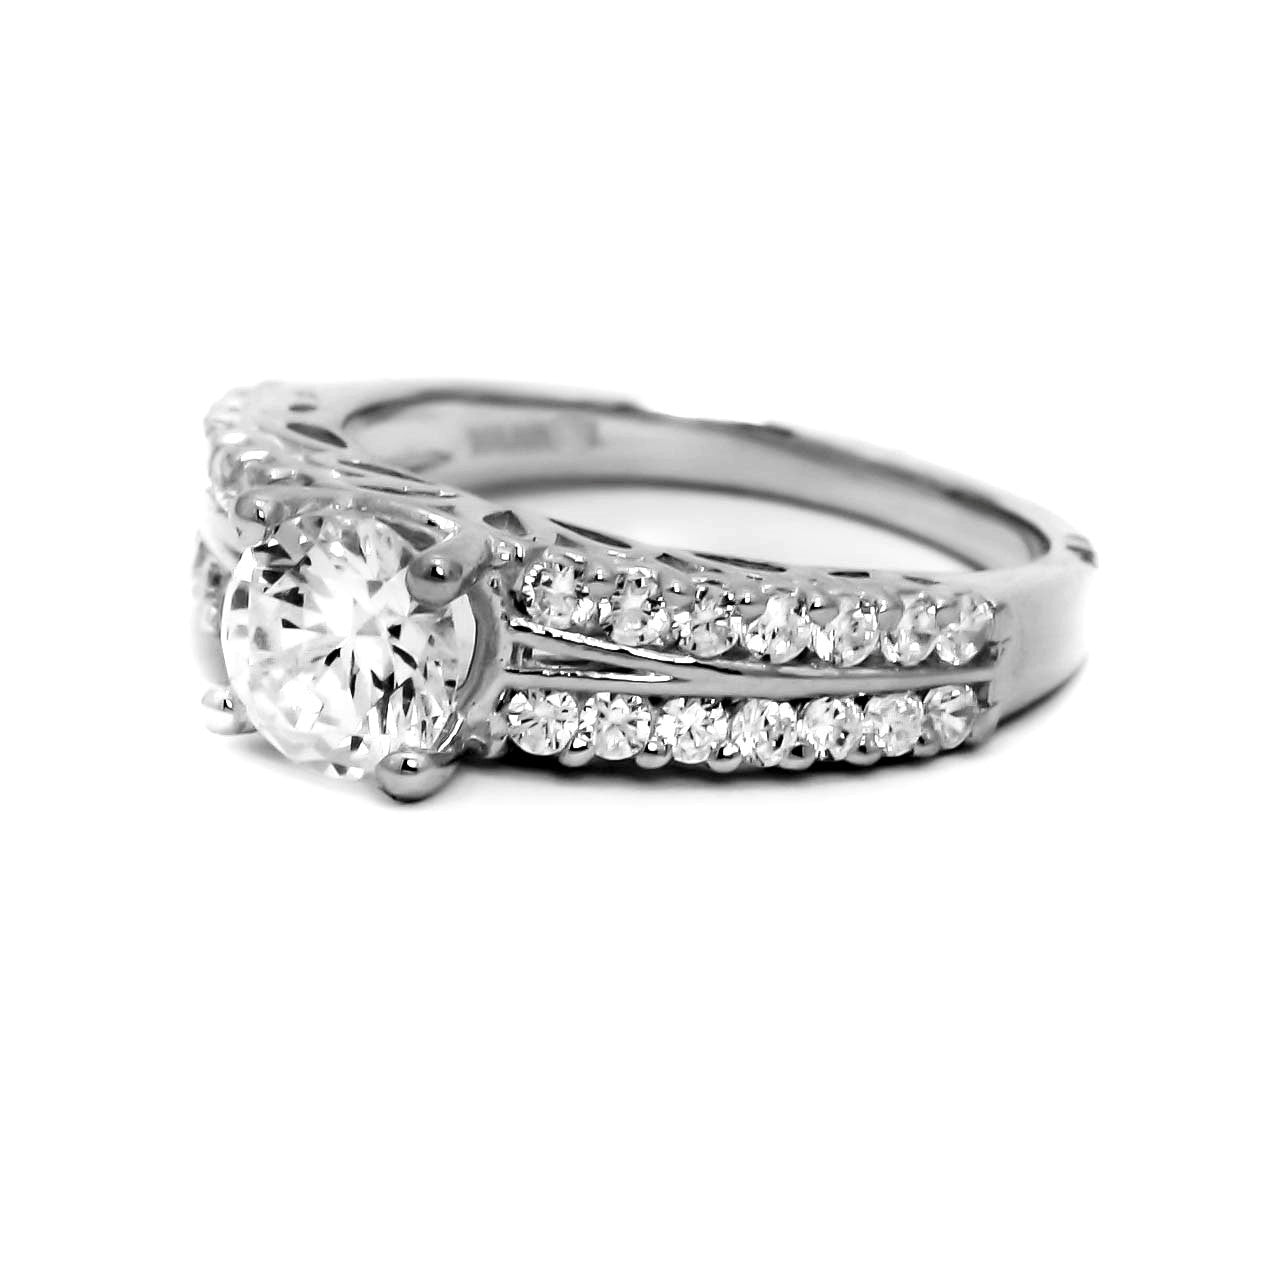 Diamond Engagement Ring With 1 Carat  "Forever Brilliant" Moissanite And .57 Carats Of Diamonds, Anniversary Ring - FBY11581